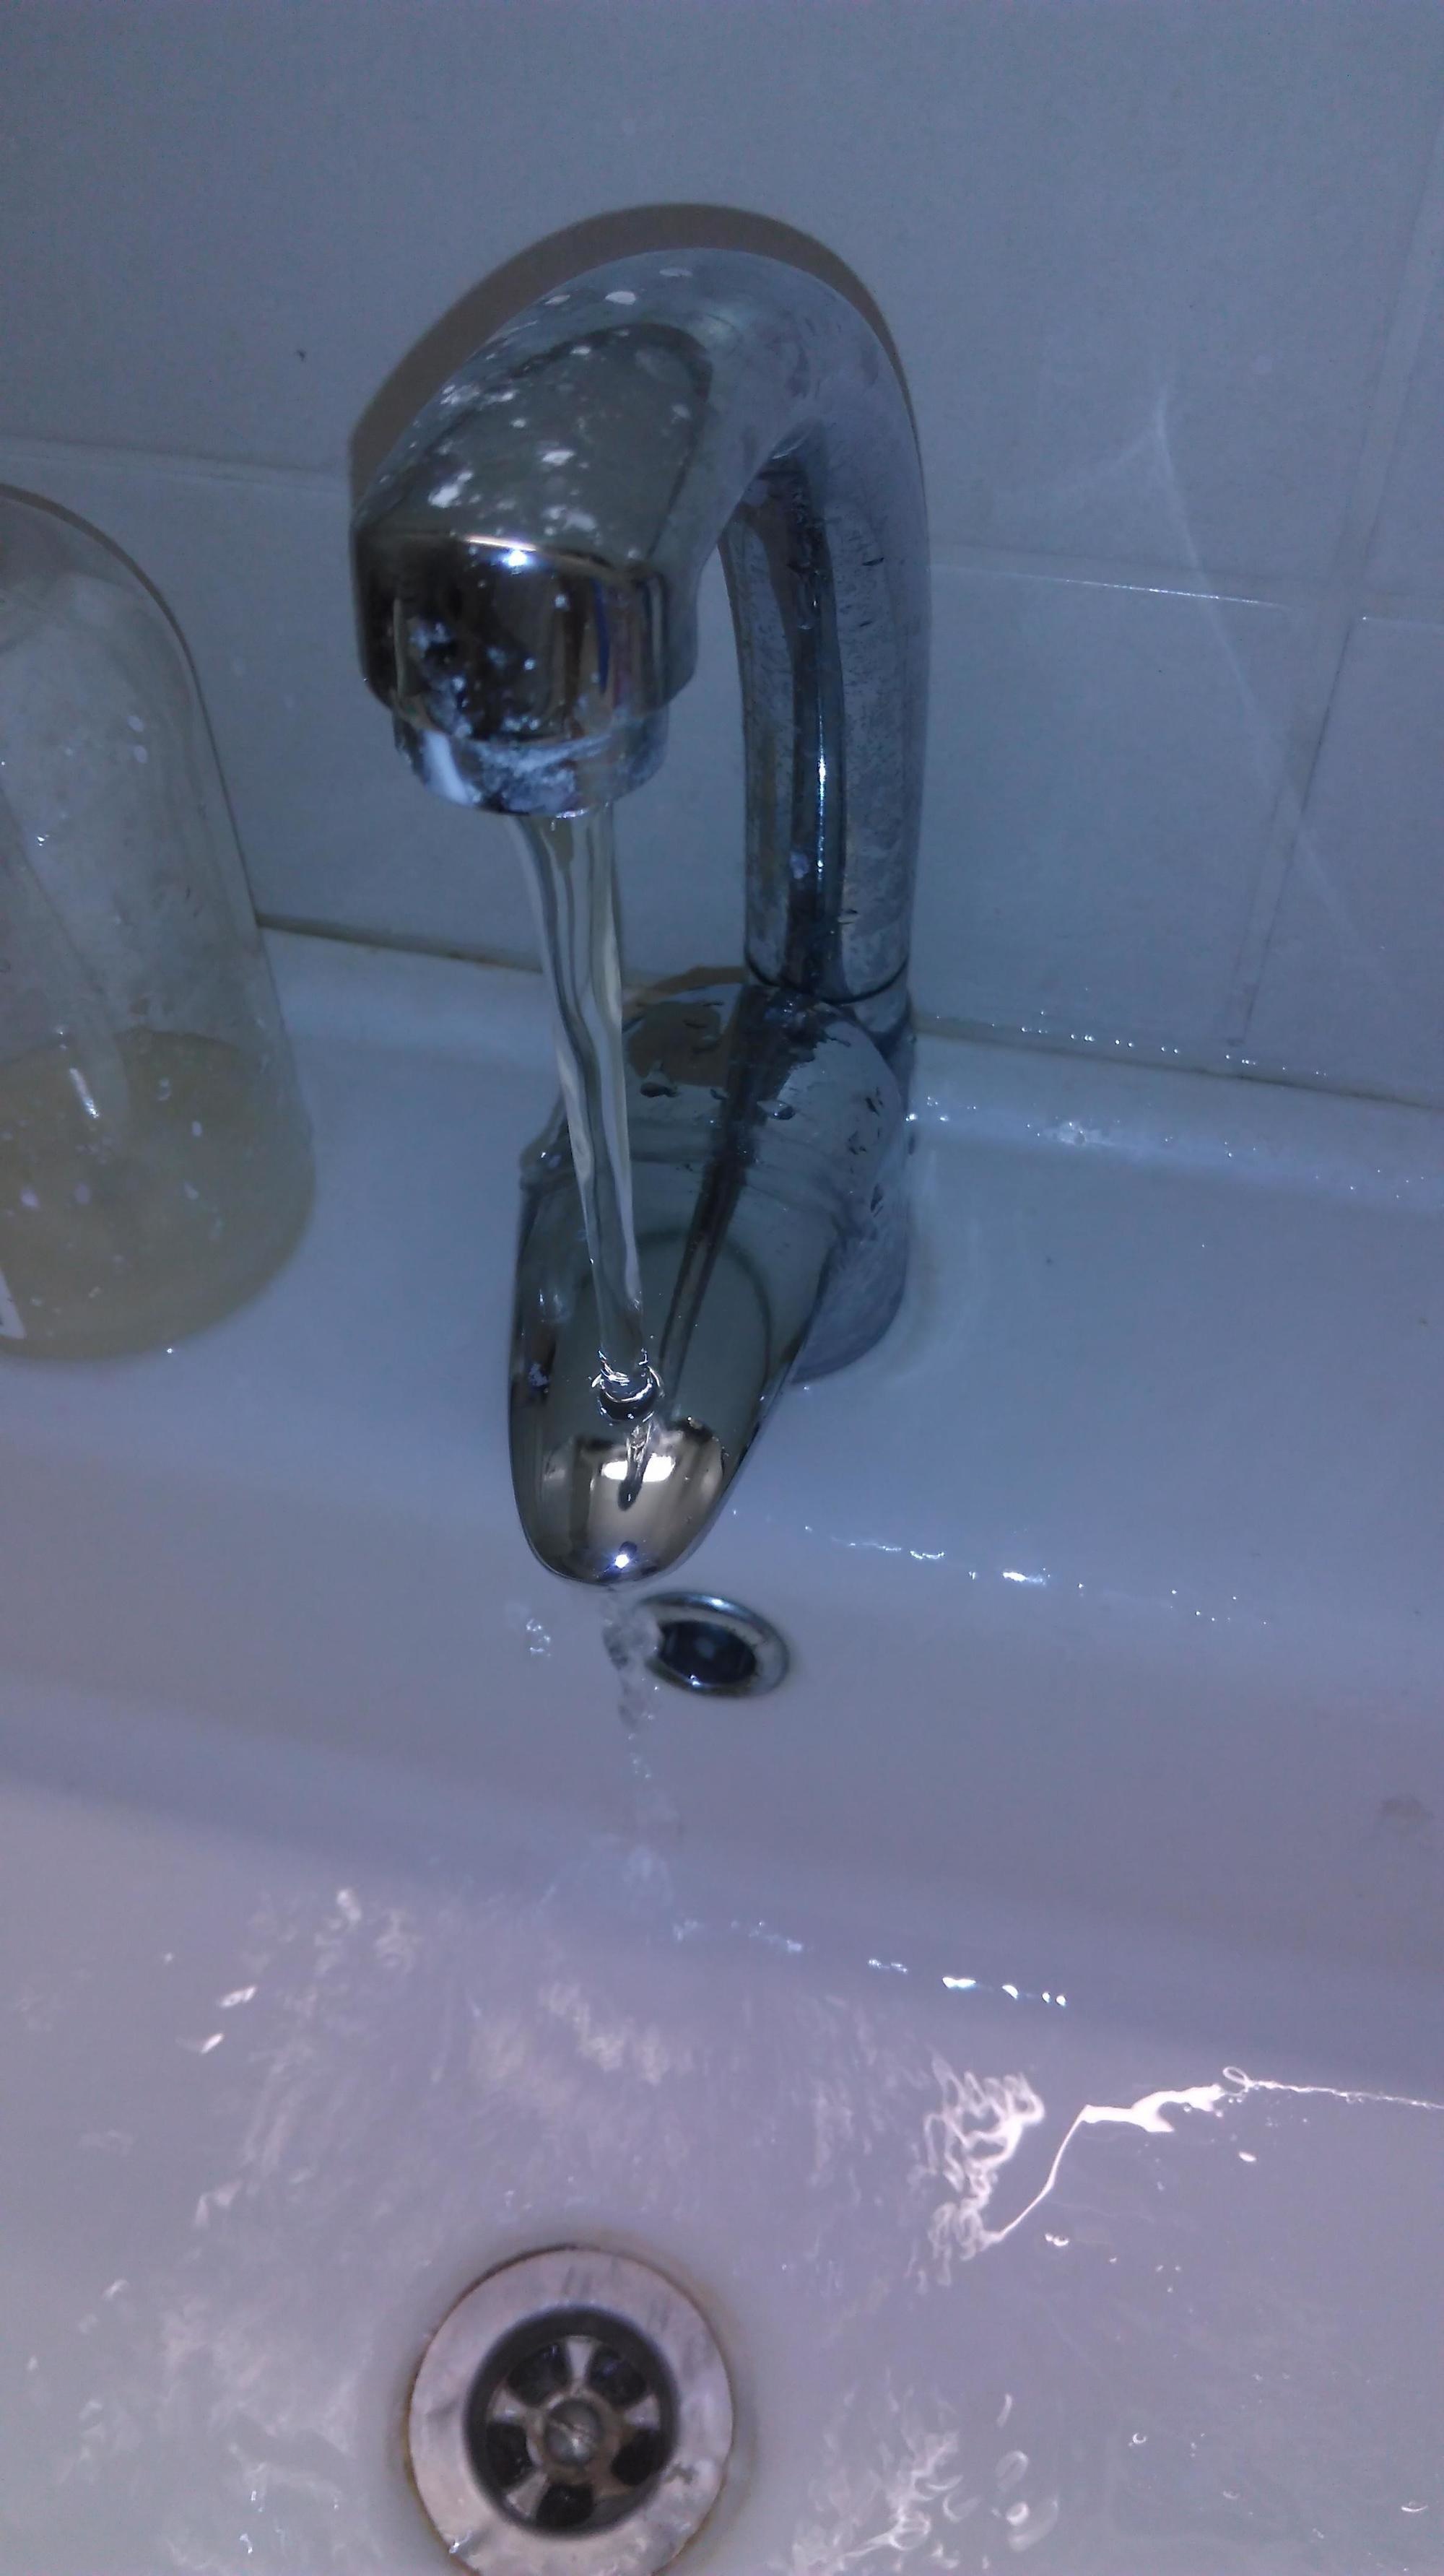 faucet that goes all over itself.